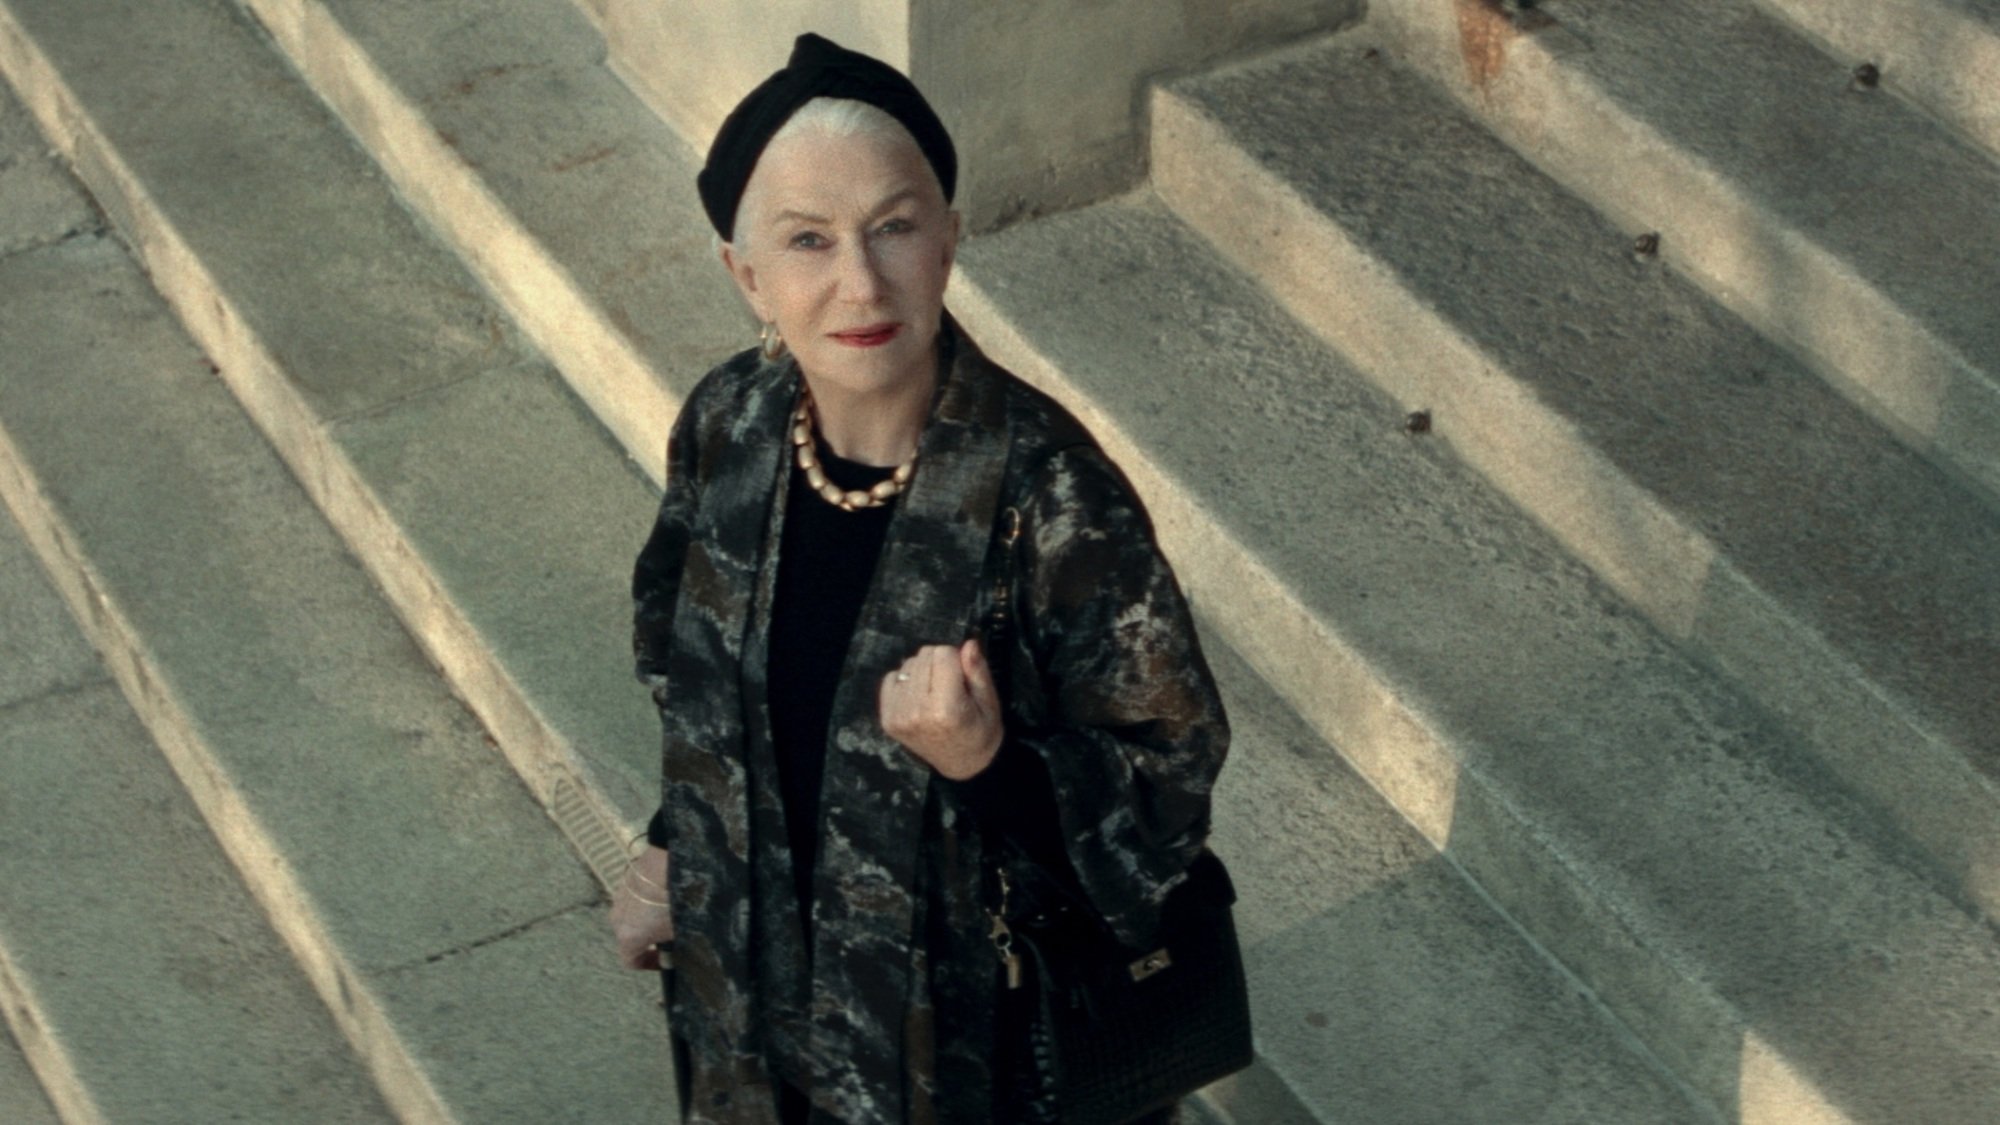 A woman in a long black coat stands outside on stone steps, smiling at the sky.